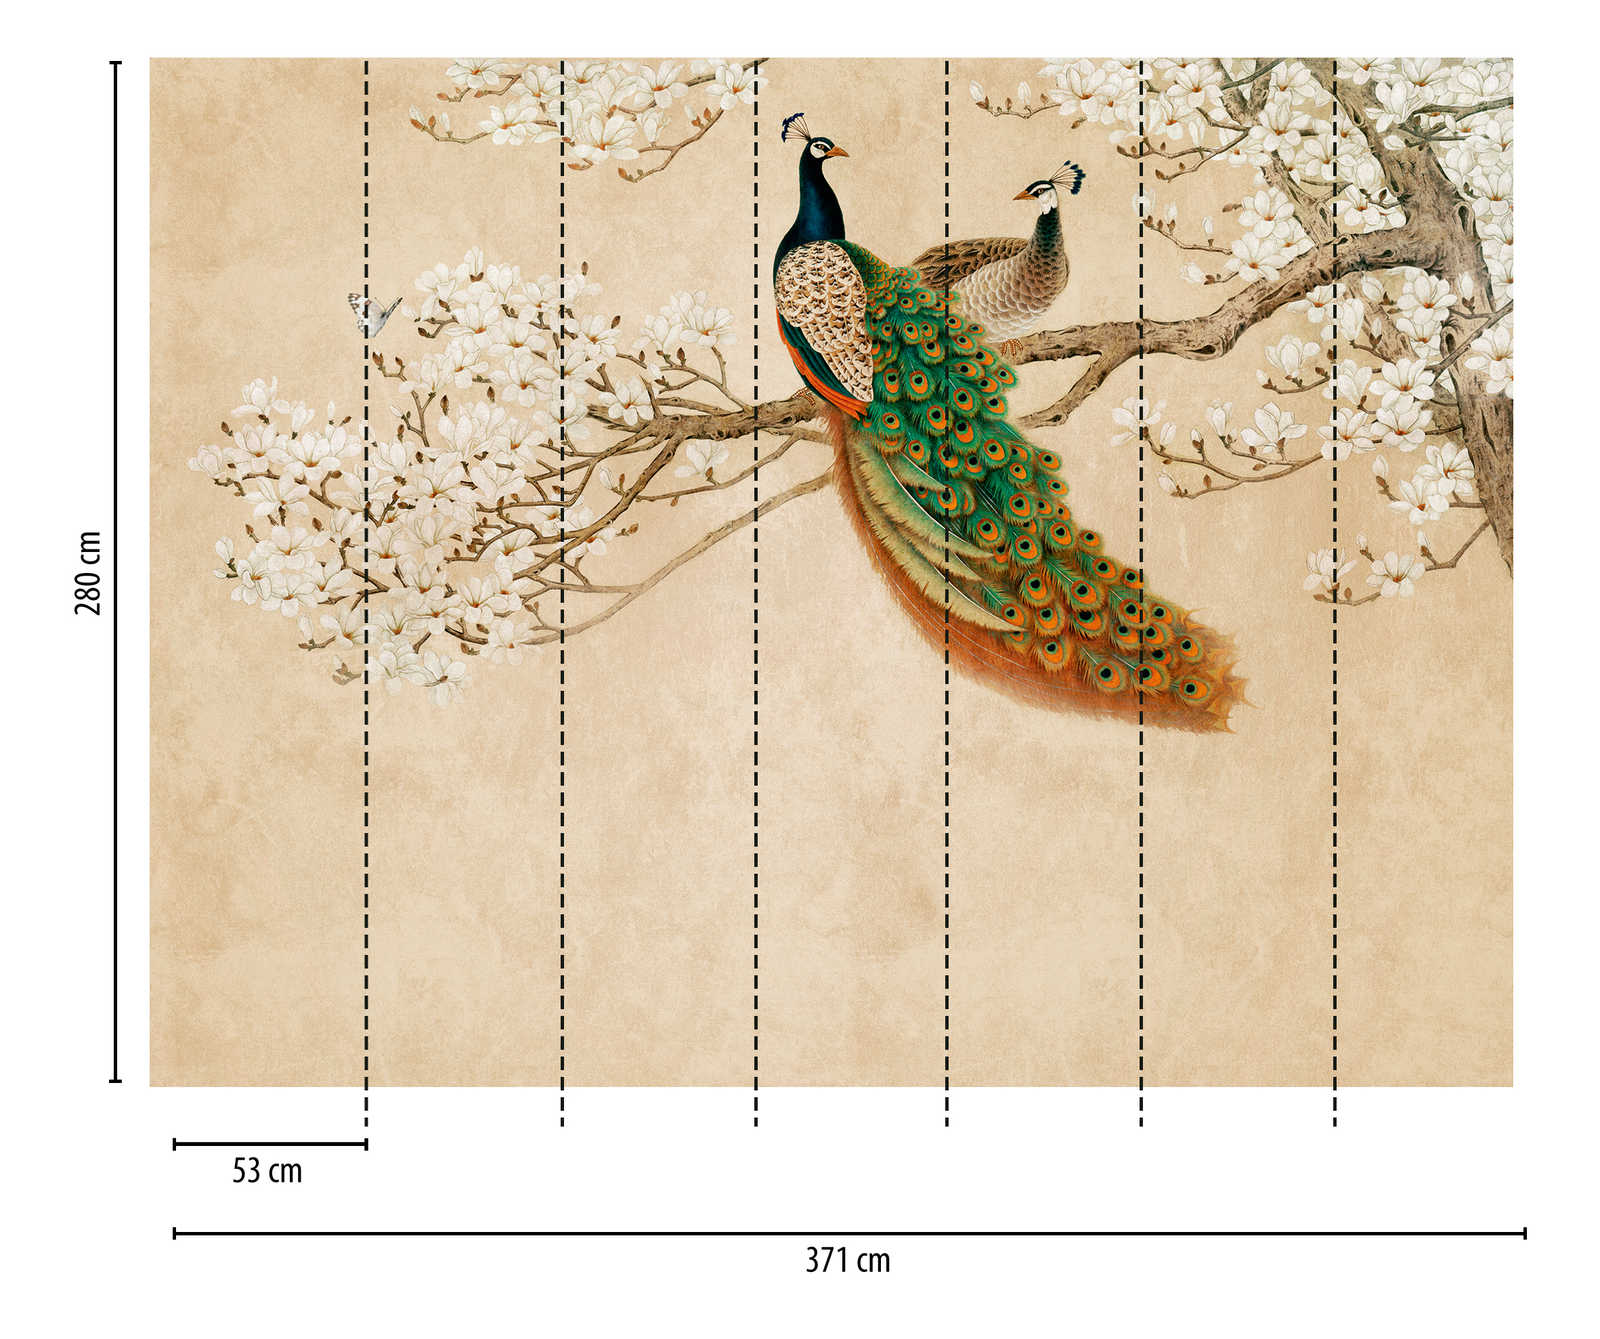             Wallpaper novelty - motif wallpaper cherry blossoms & peacock in Asian style
        